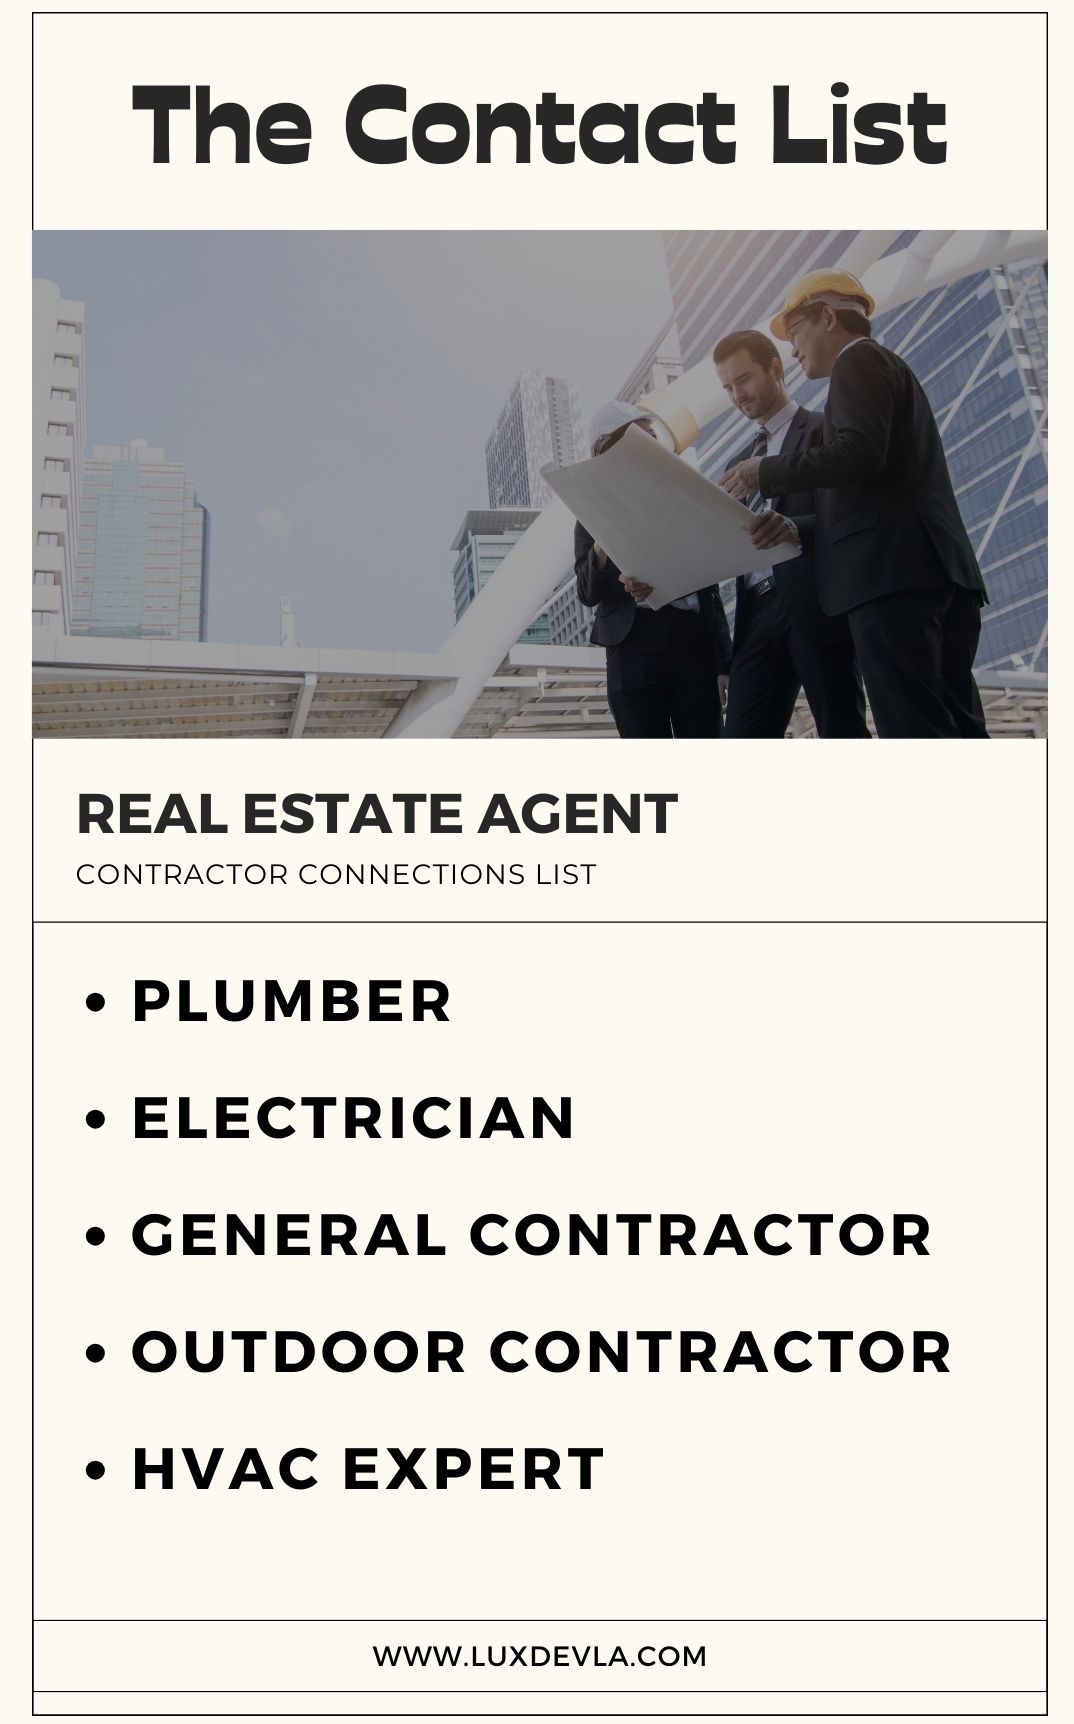 5 Contractors Every Real Estate Agent Needs to Know